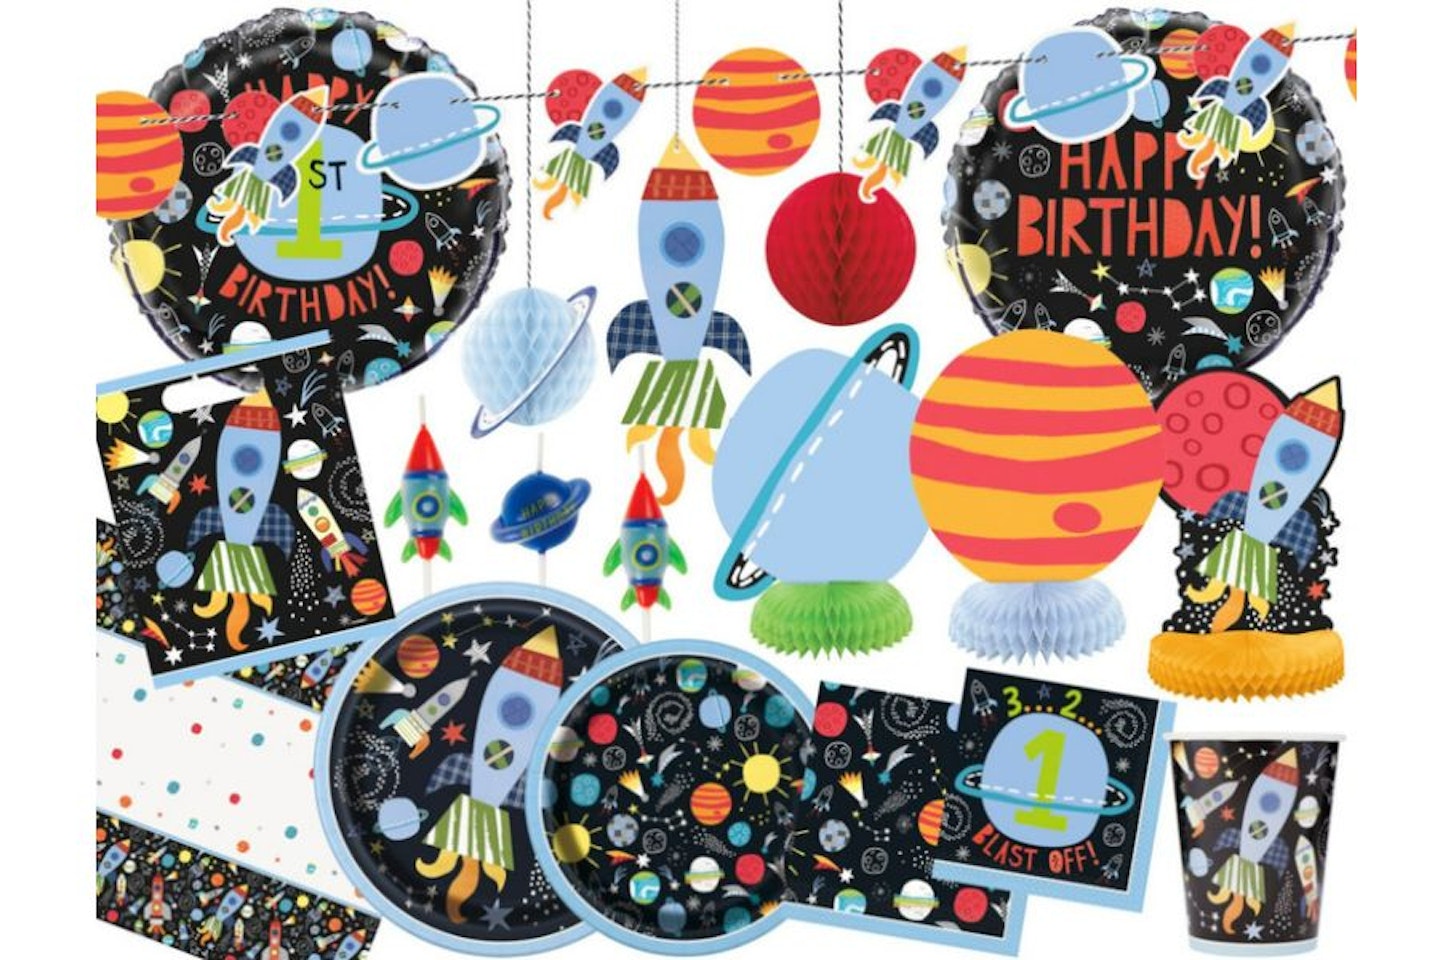 Space party ideas - Party Touches UK Outer Space Party Decorations